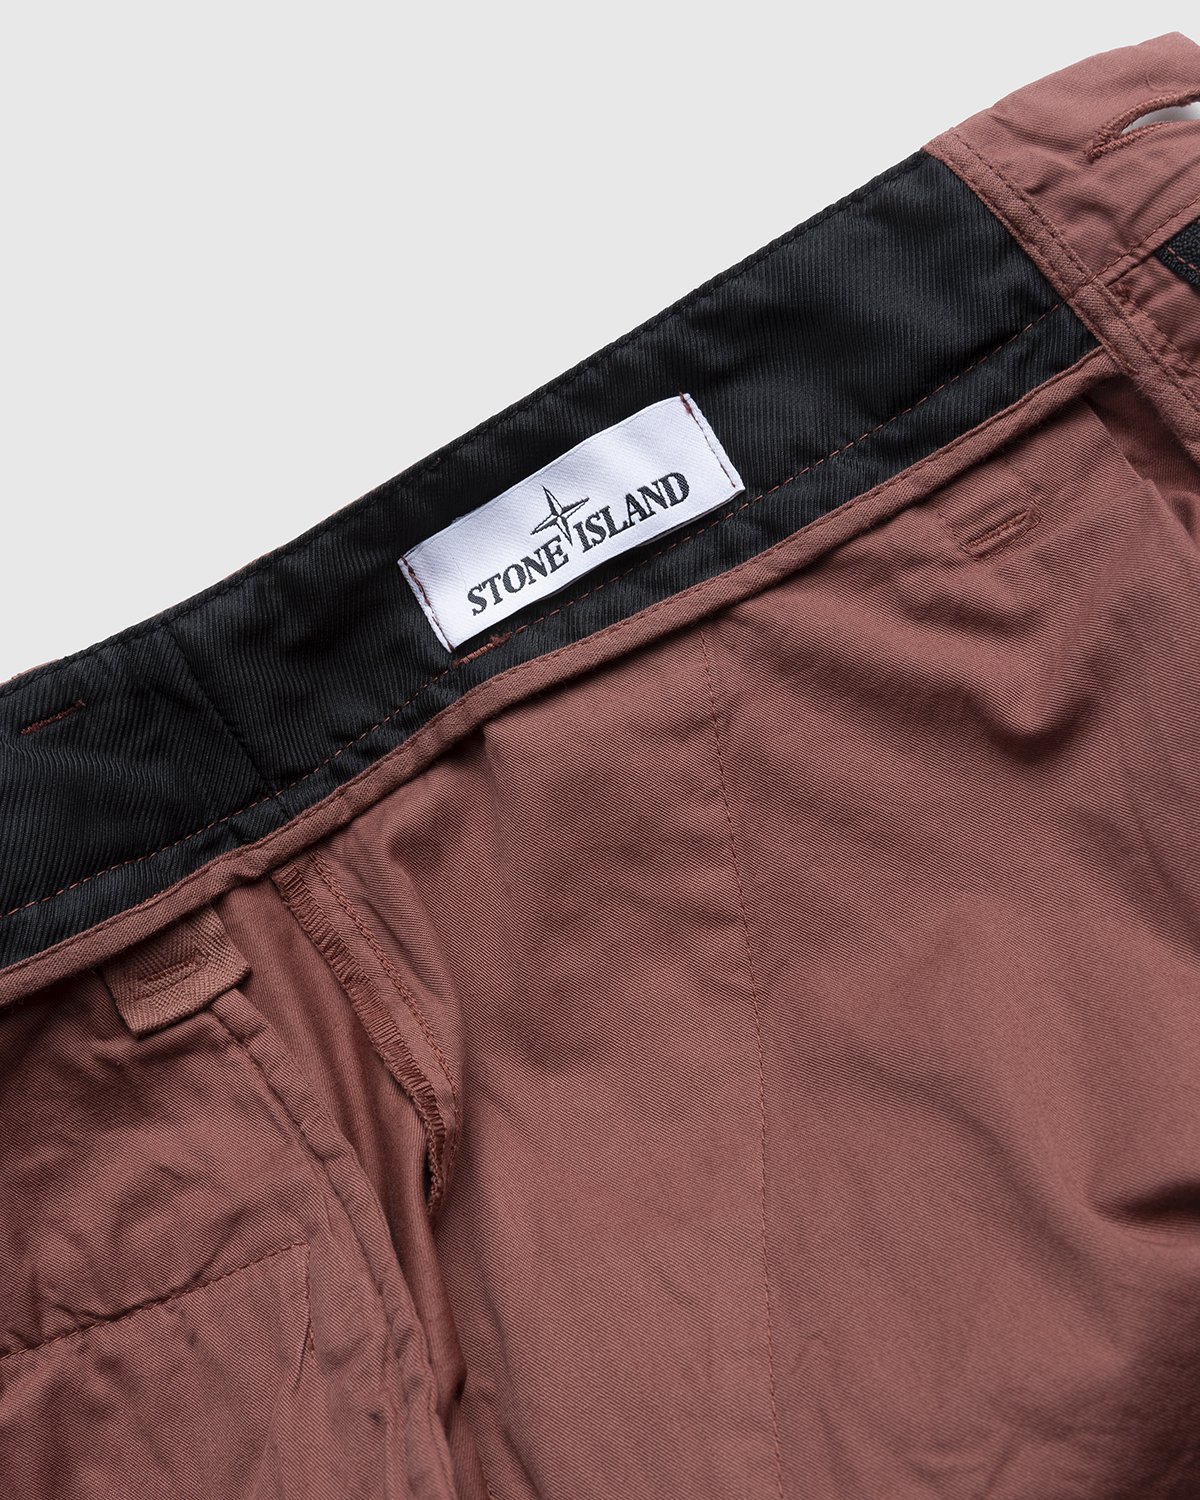 Stone Island - Pants Brick Red - Clothing - Red - Image 5